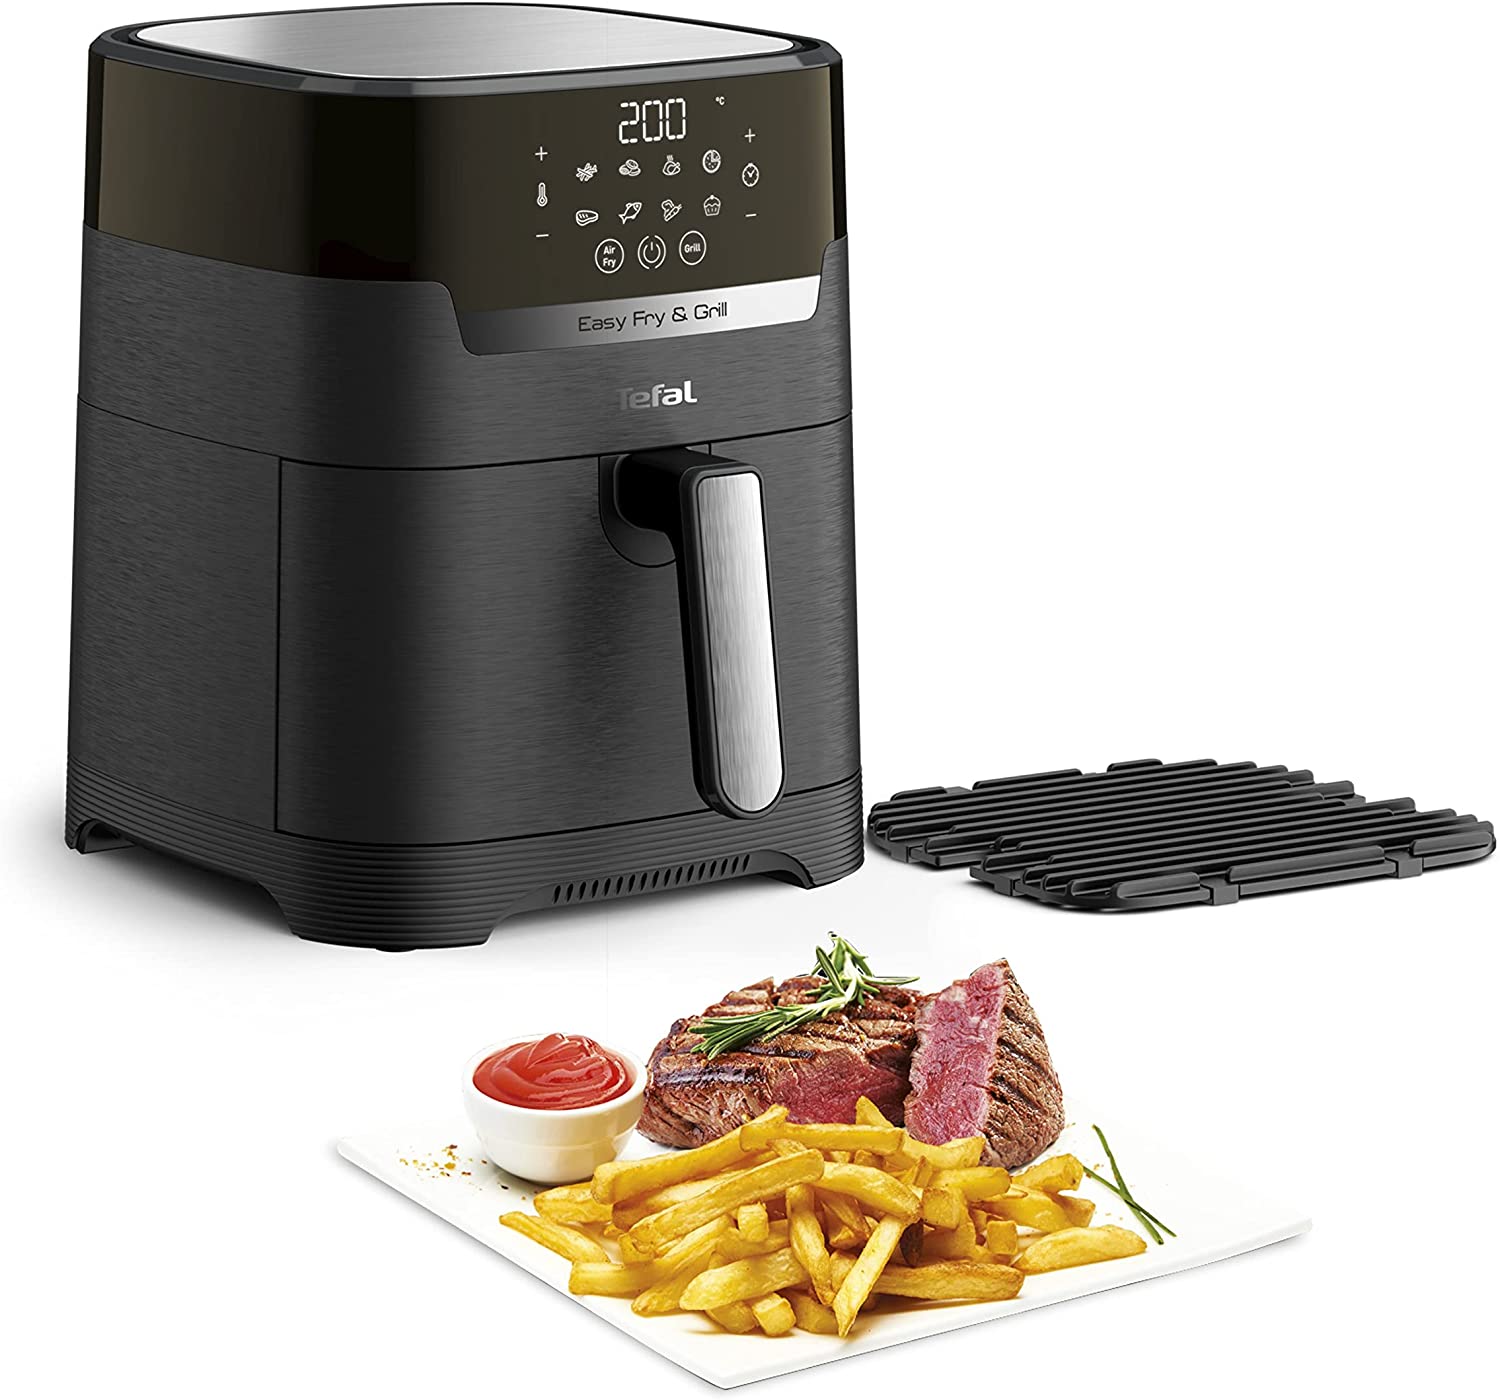 Tefal EY5058 Easy Fry & Grill Precision Hot Air Fryer | 2-in-1 Technology (Hot Air Fryer and Grill) | Digital Display | Capacity: 4.2 Litres | 8 Automatic Programmes | Black